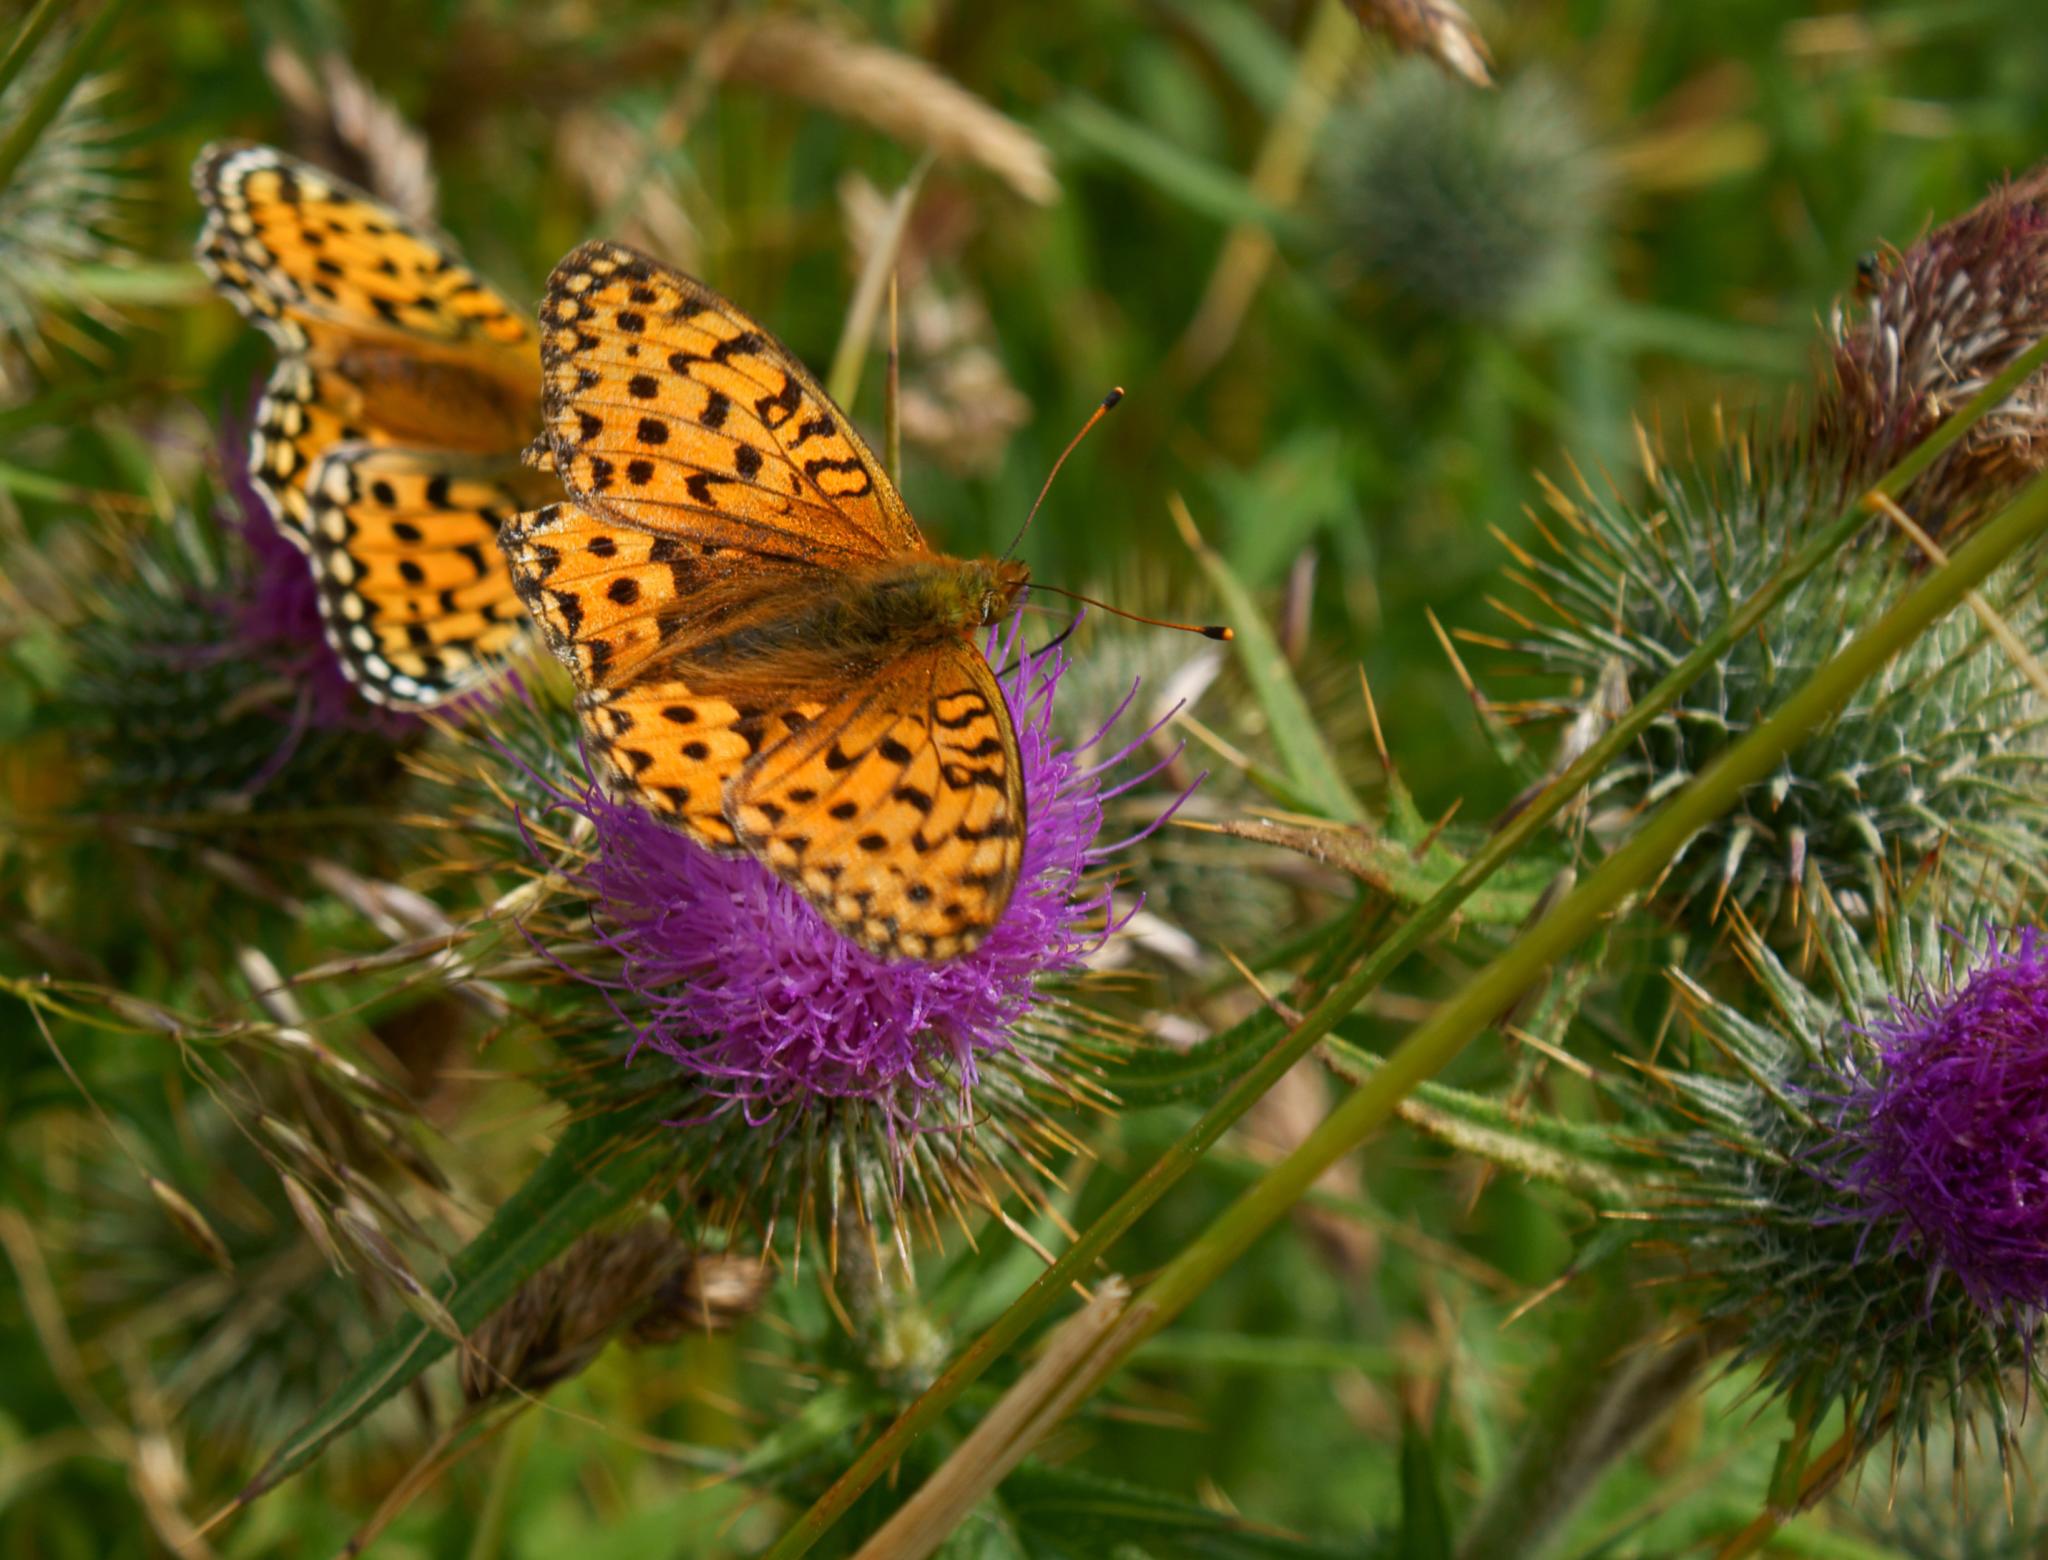 Photograph: Twins On Thistles